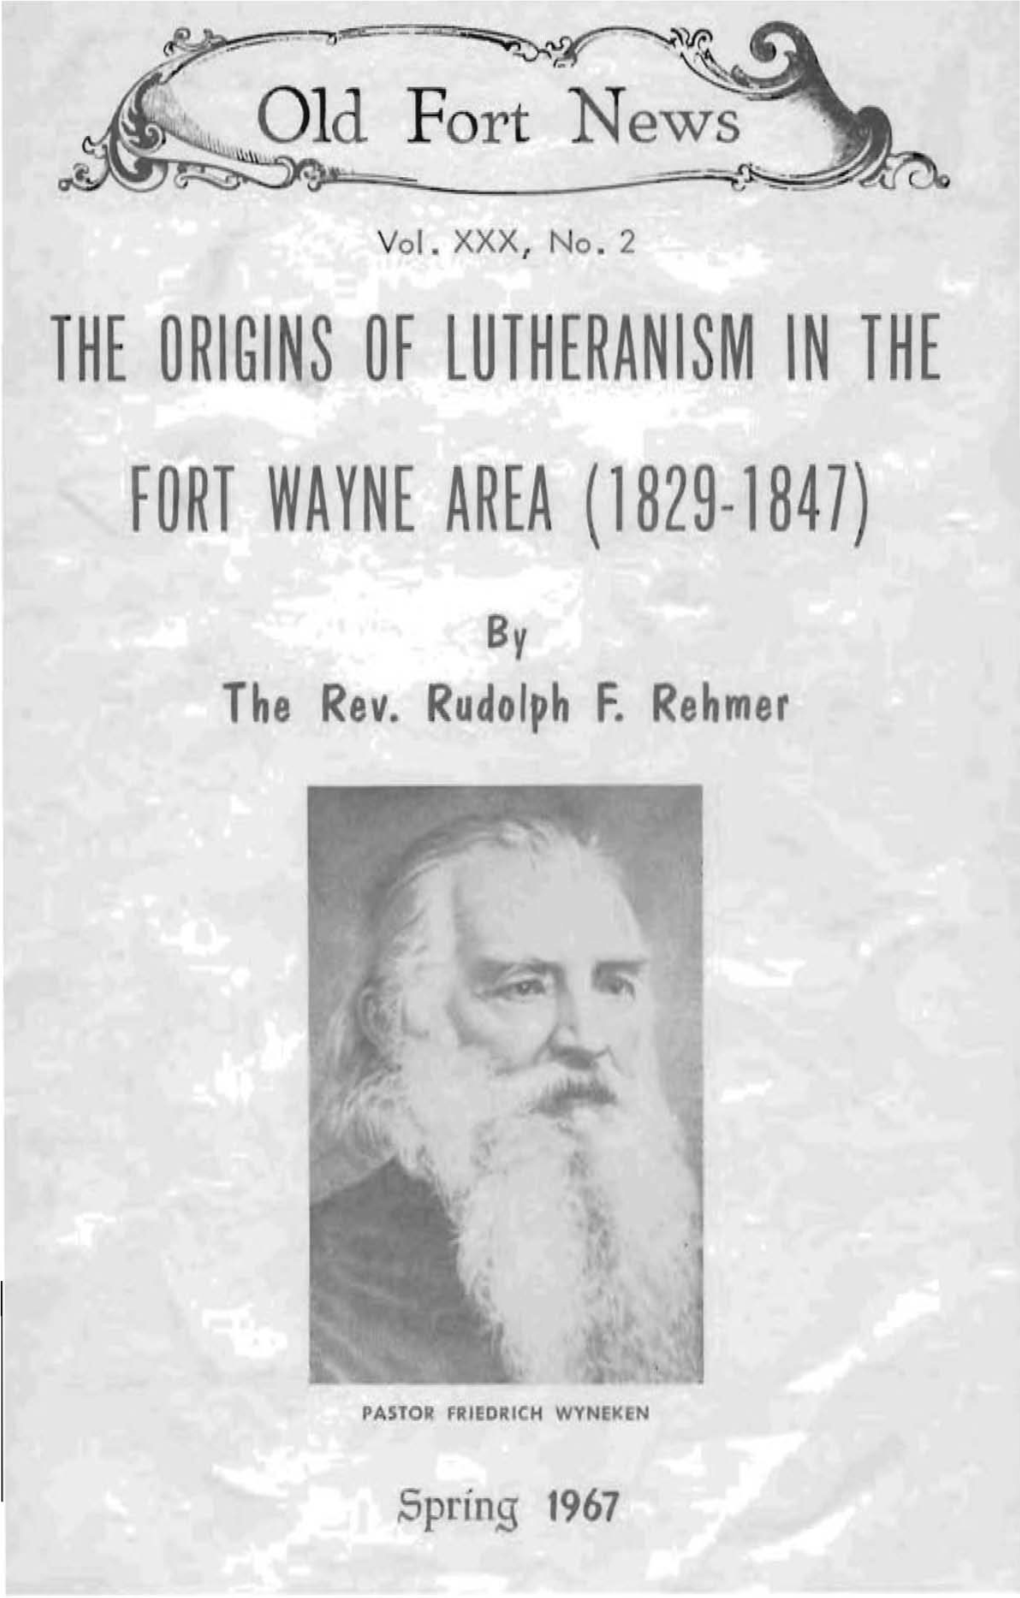 The Origins of Lutheranism in the Fort Wayne Area